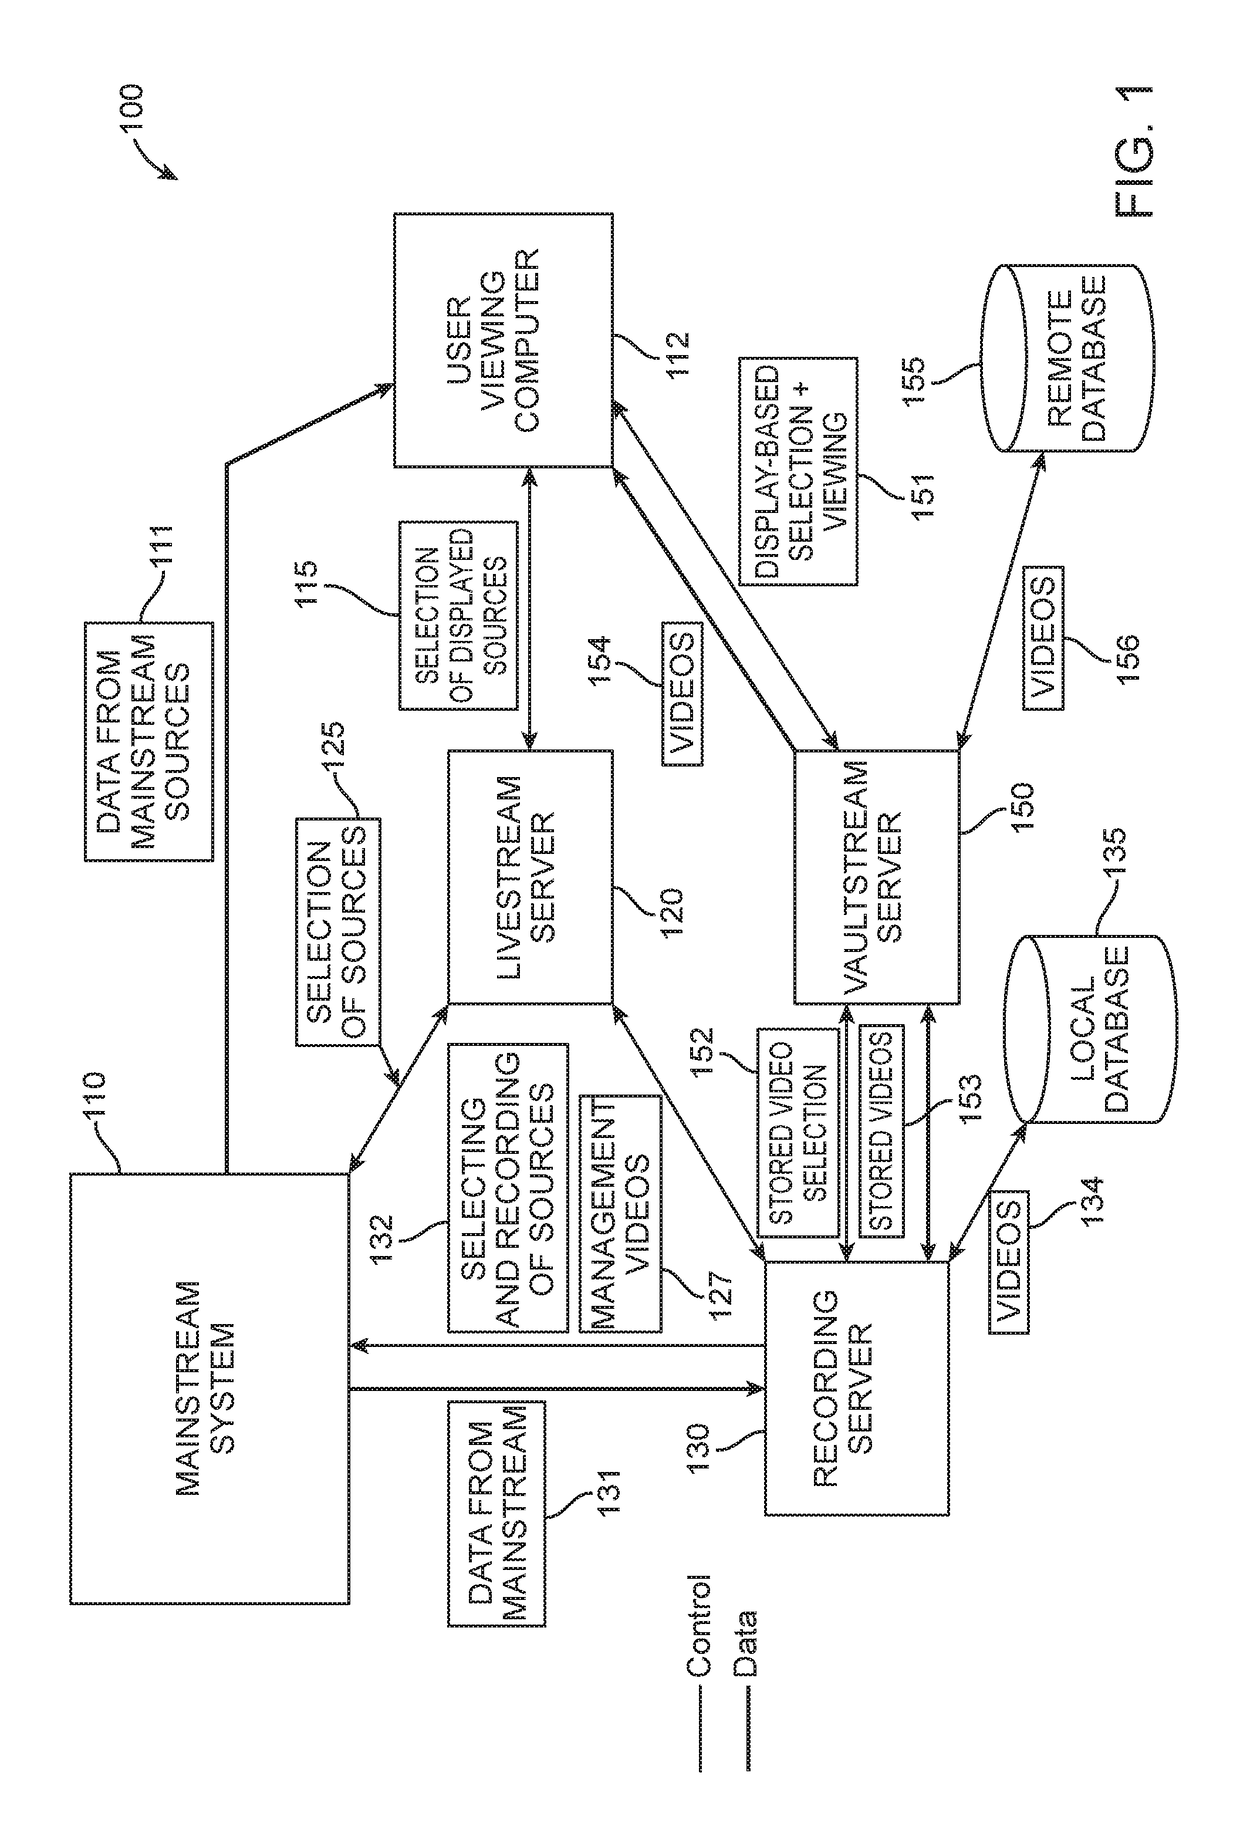 System and method for identifying devices in a room on a network